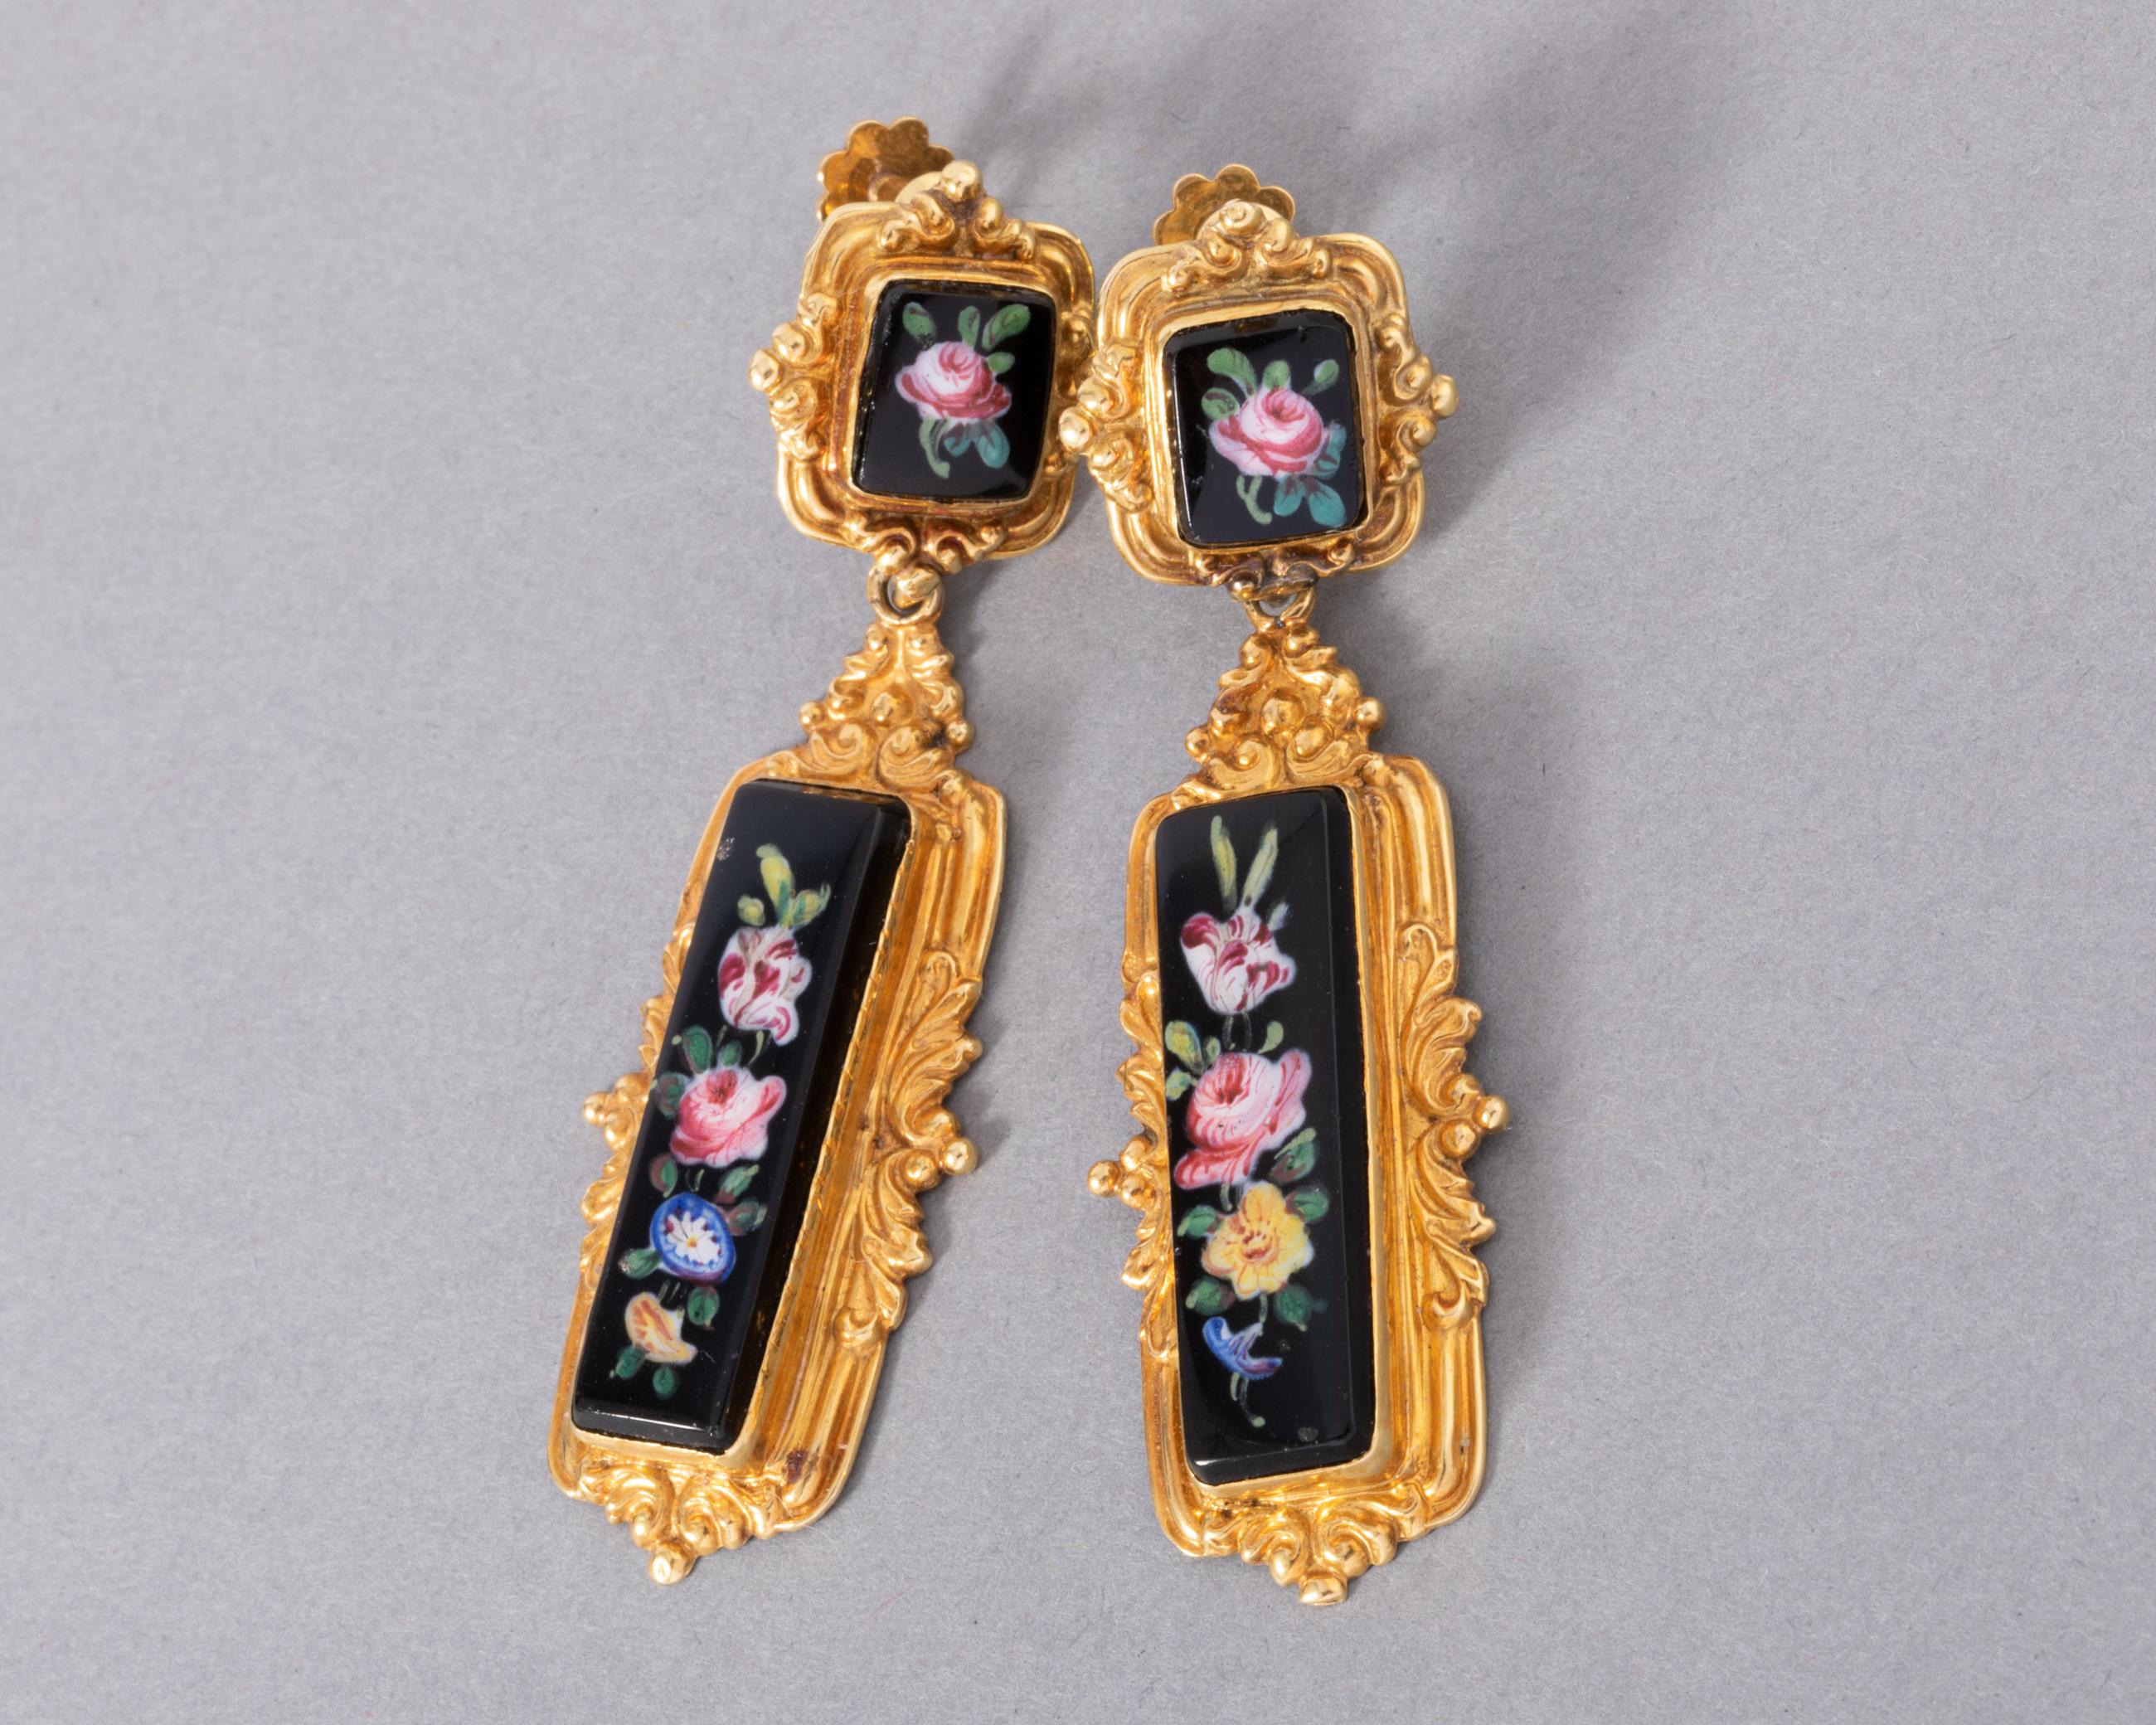 Romantic Antique Gold and Enamel French Earrings and Brooch